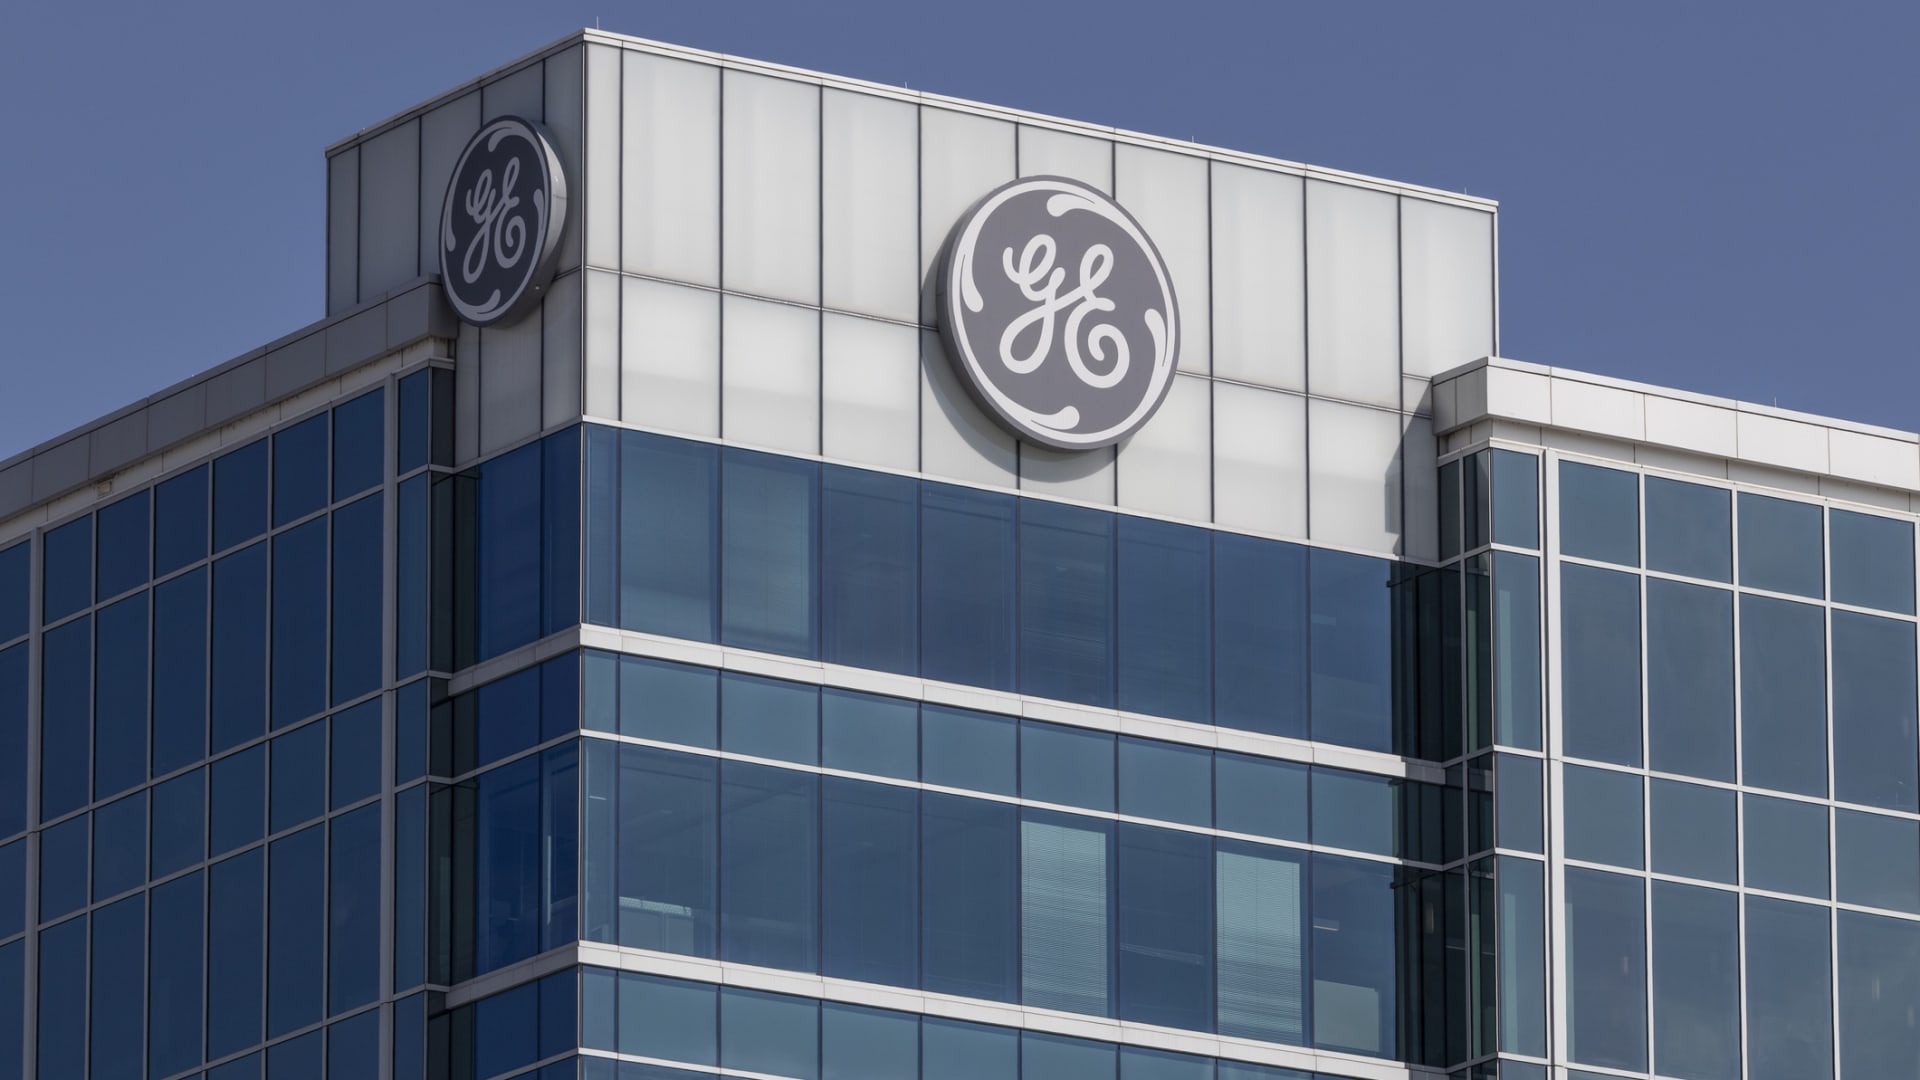 Stocks making the biggest moves midday: General Electric, Silvergate Capital, Peloton, Etsy and more